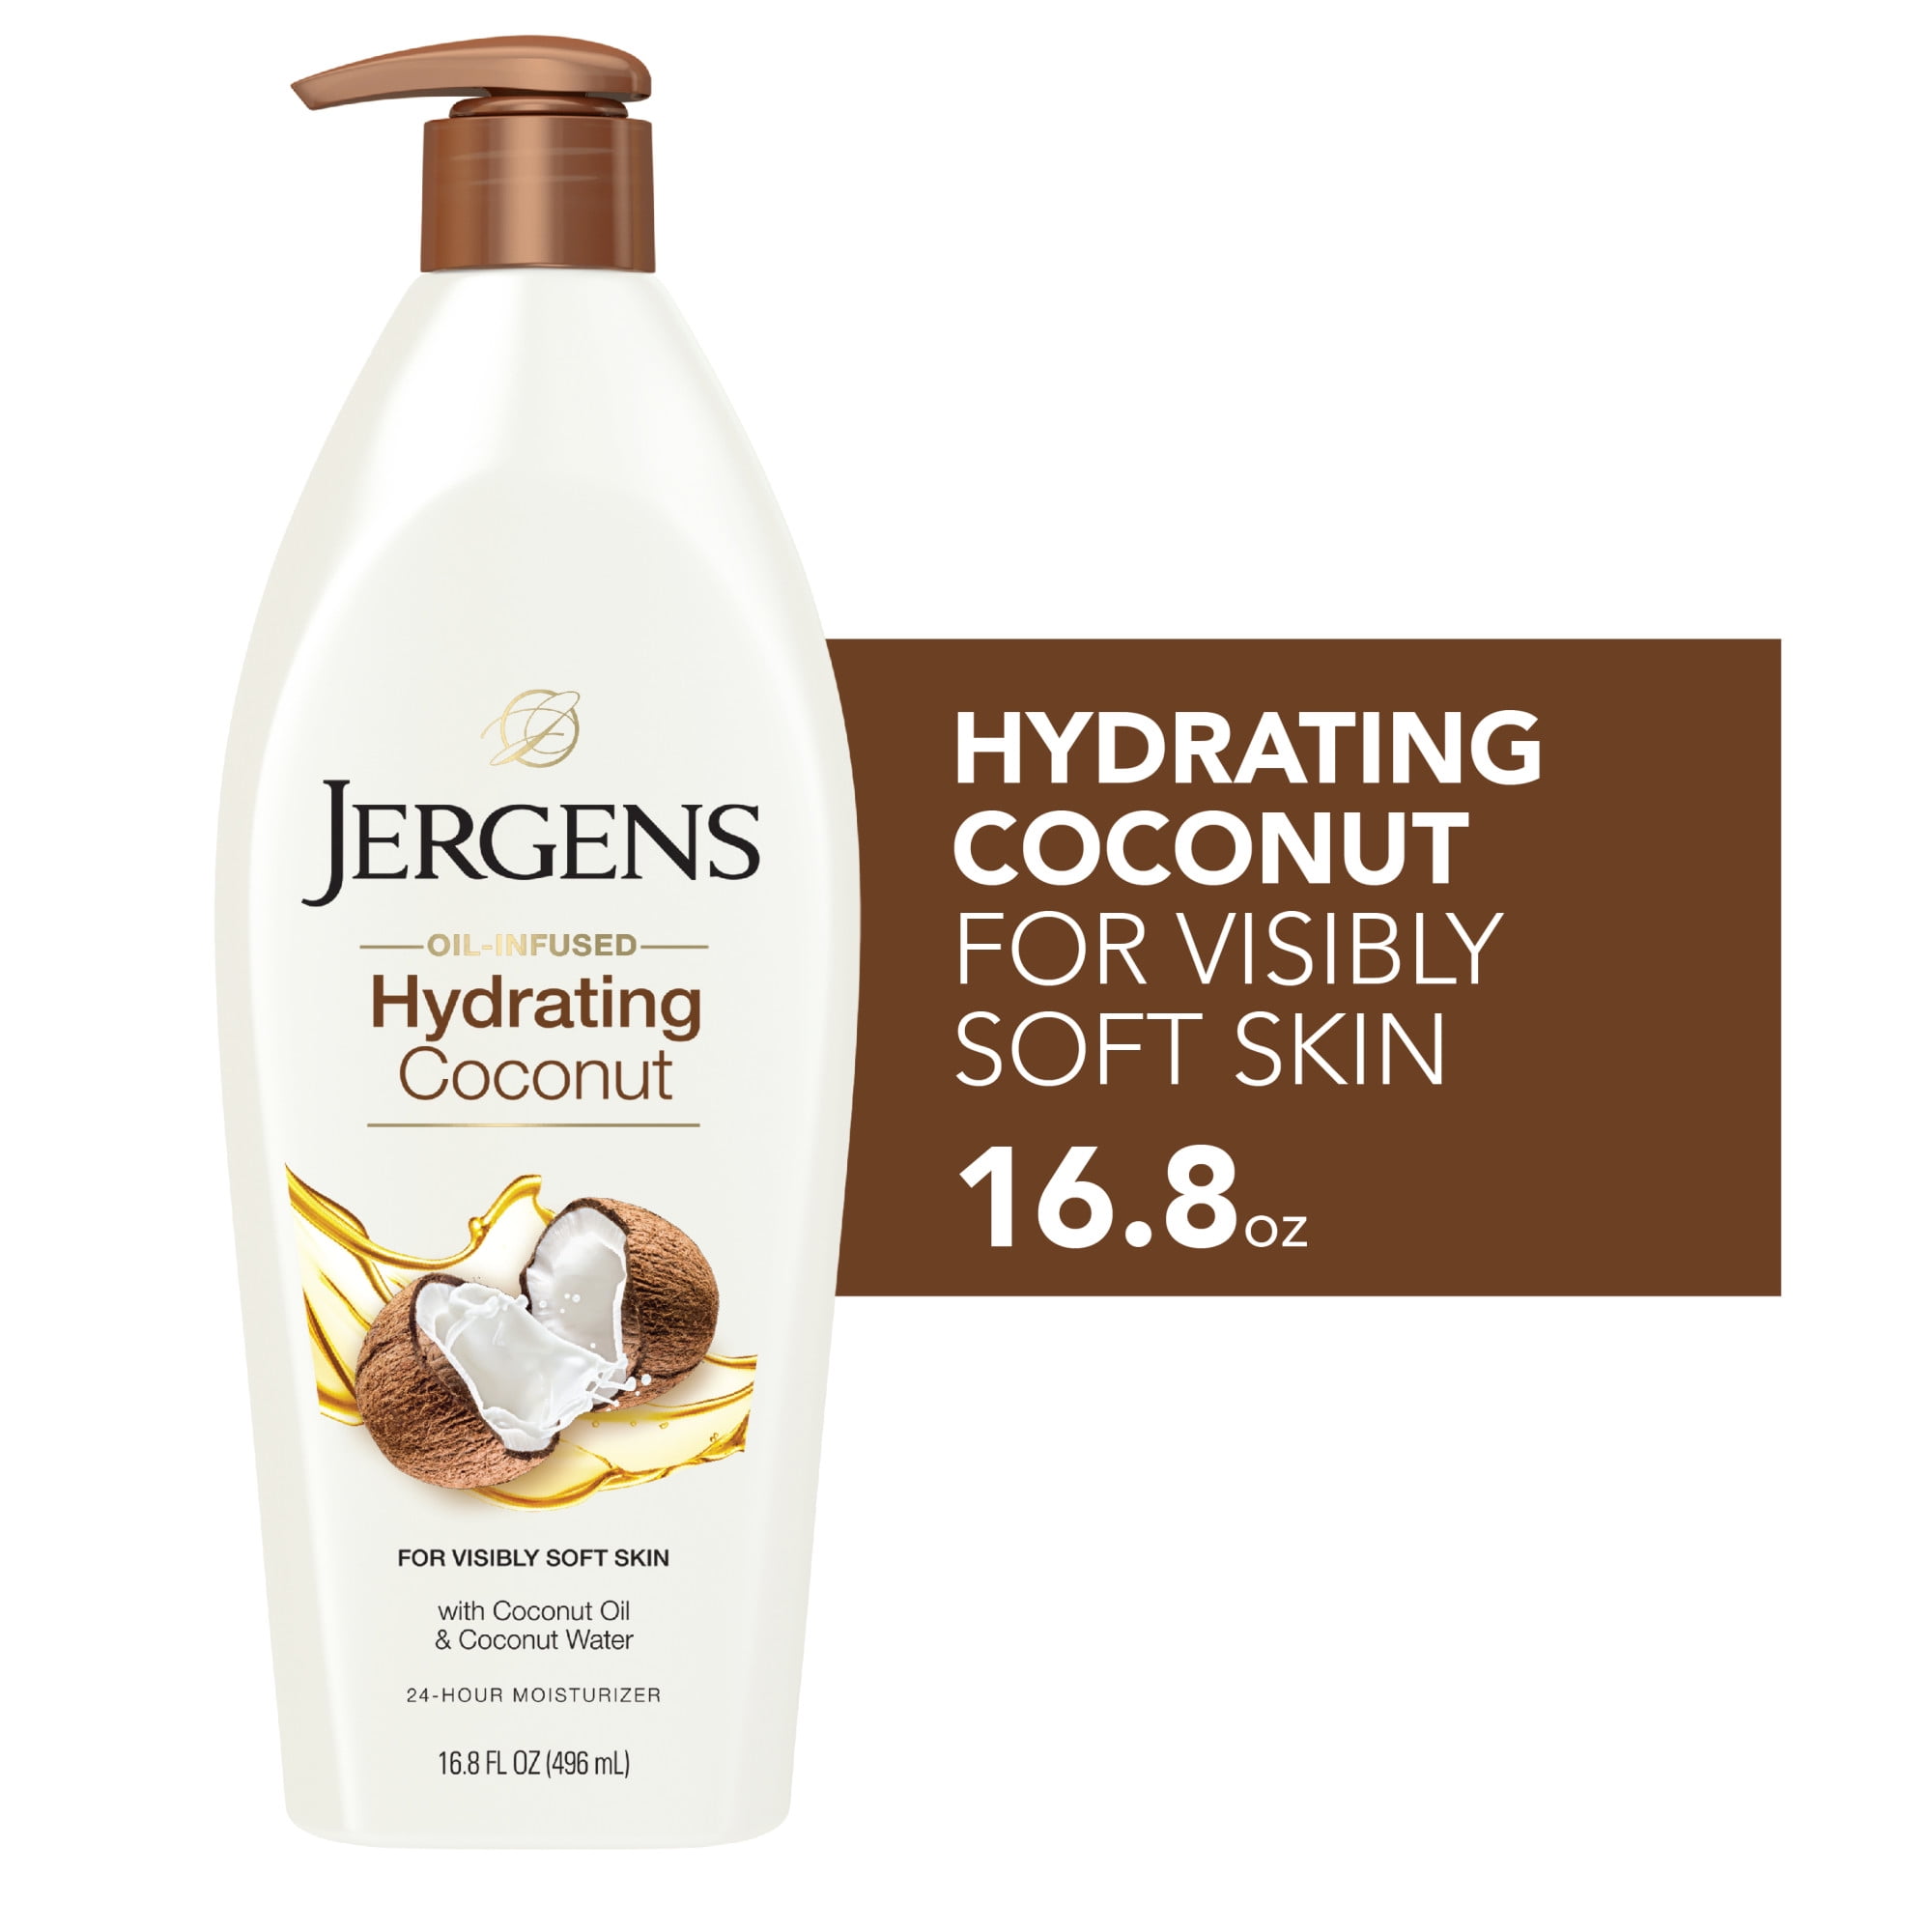 Jergens Hand and Body Lotion, Hydrating Coconut Body Lotion, 16.8 Oz